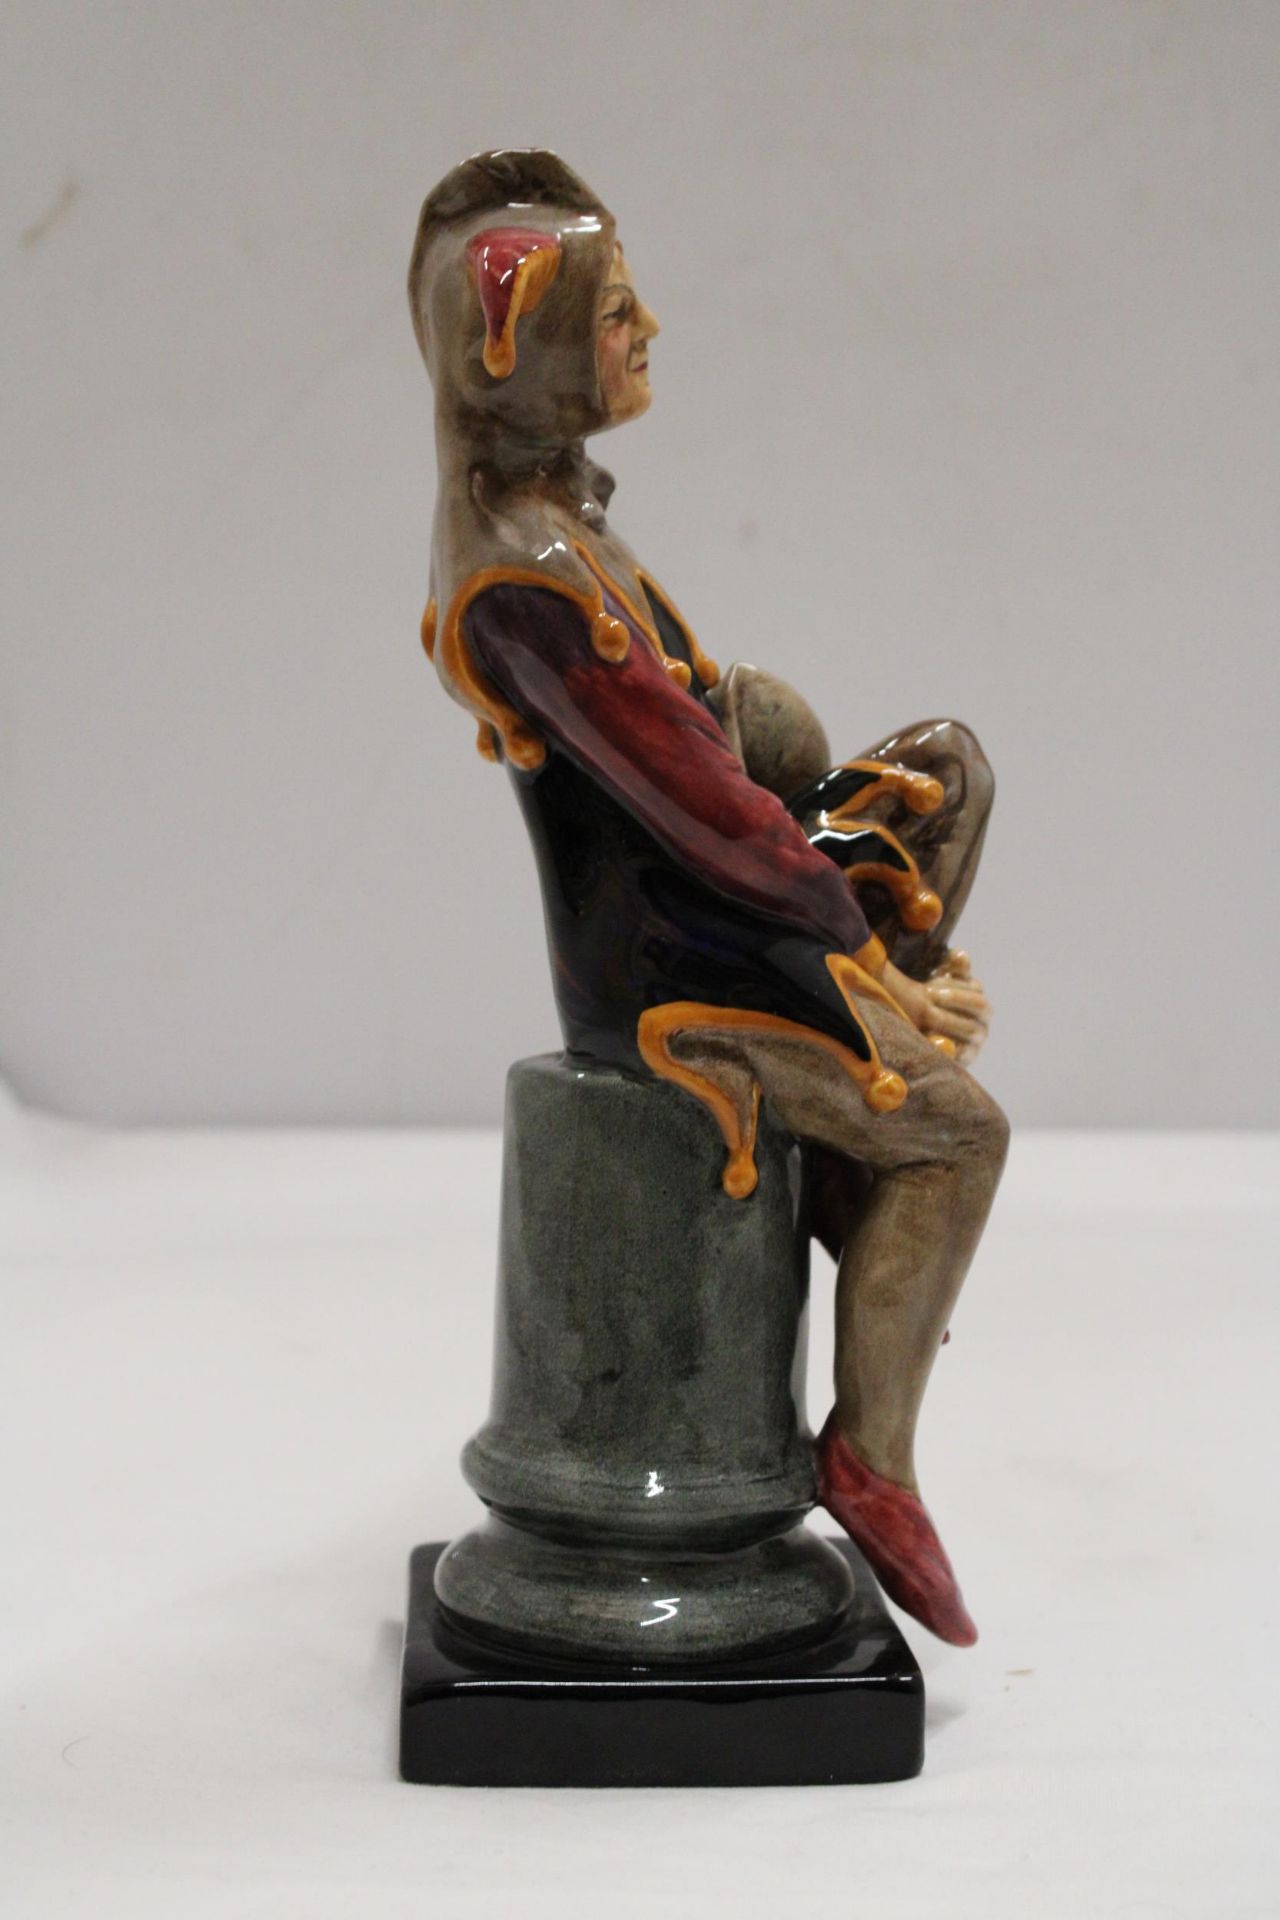 A ROYAL DOULTON FIGURE "THE JESTER" HN 2016 - Image 3 of 6